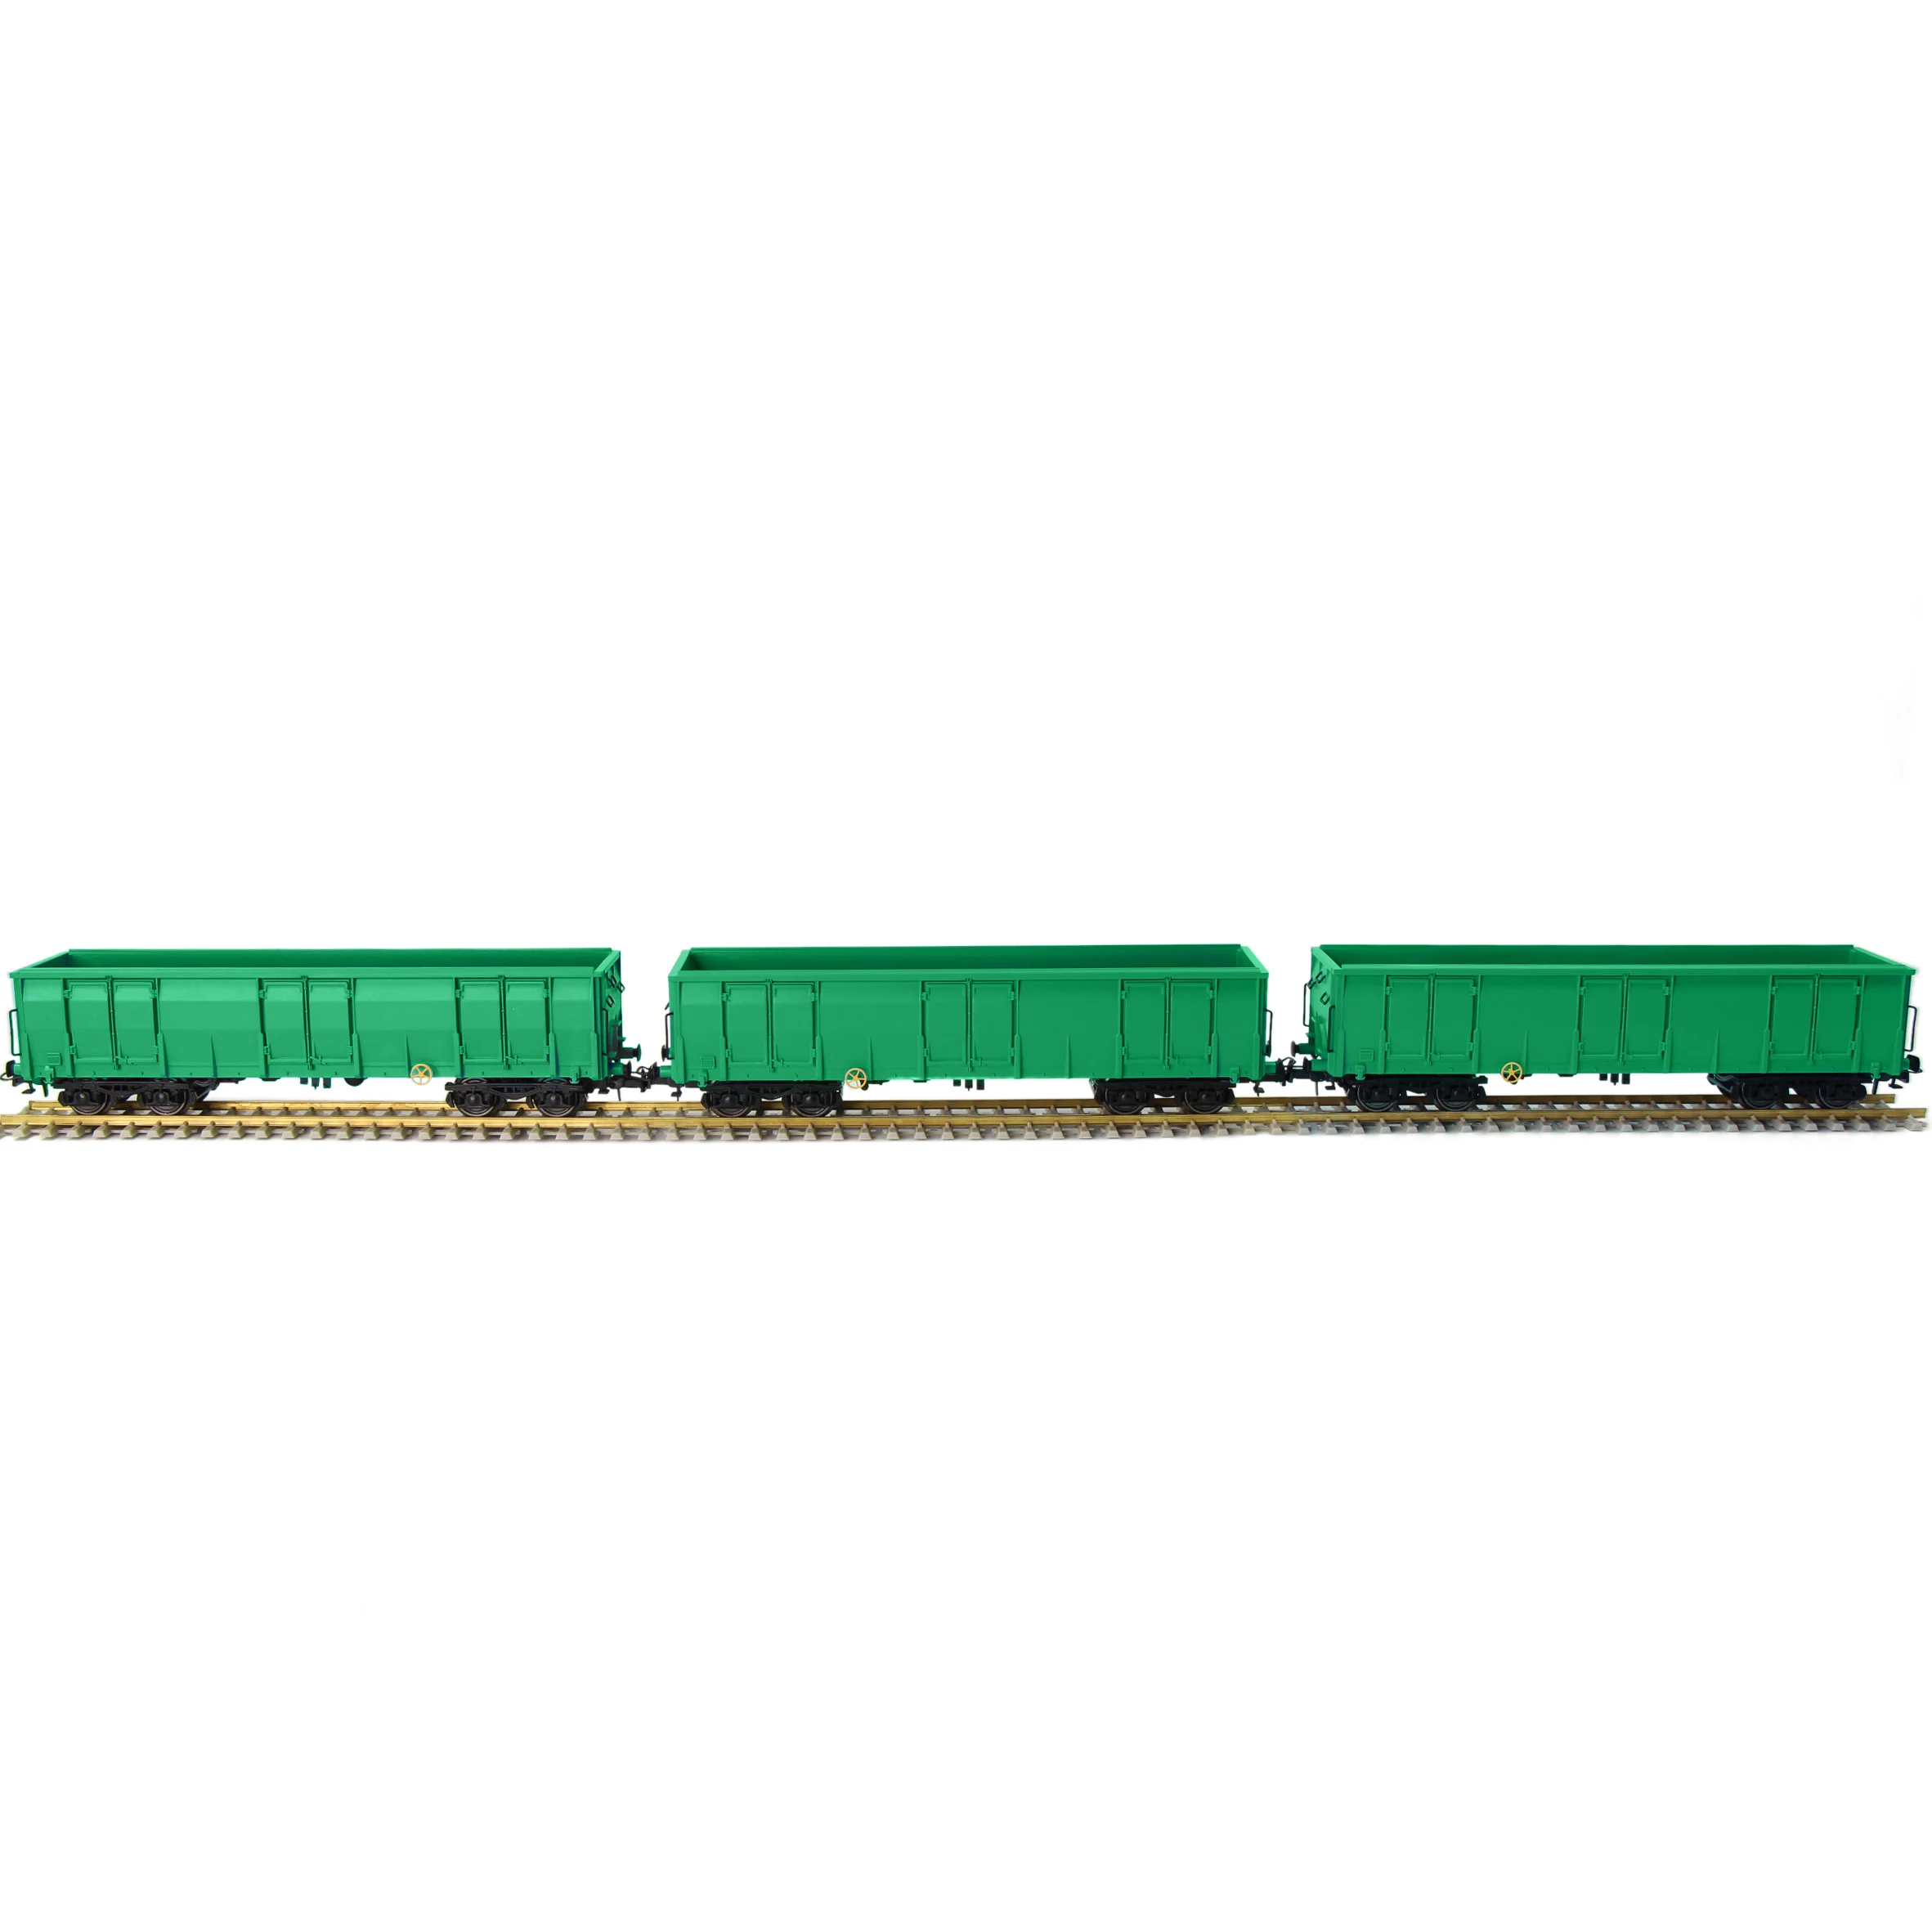 

3pcs HO Scale 1:87 High-side Gondola Car Green Wagon Rolling Stock Railway Container Carriage Freight Car C8742